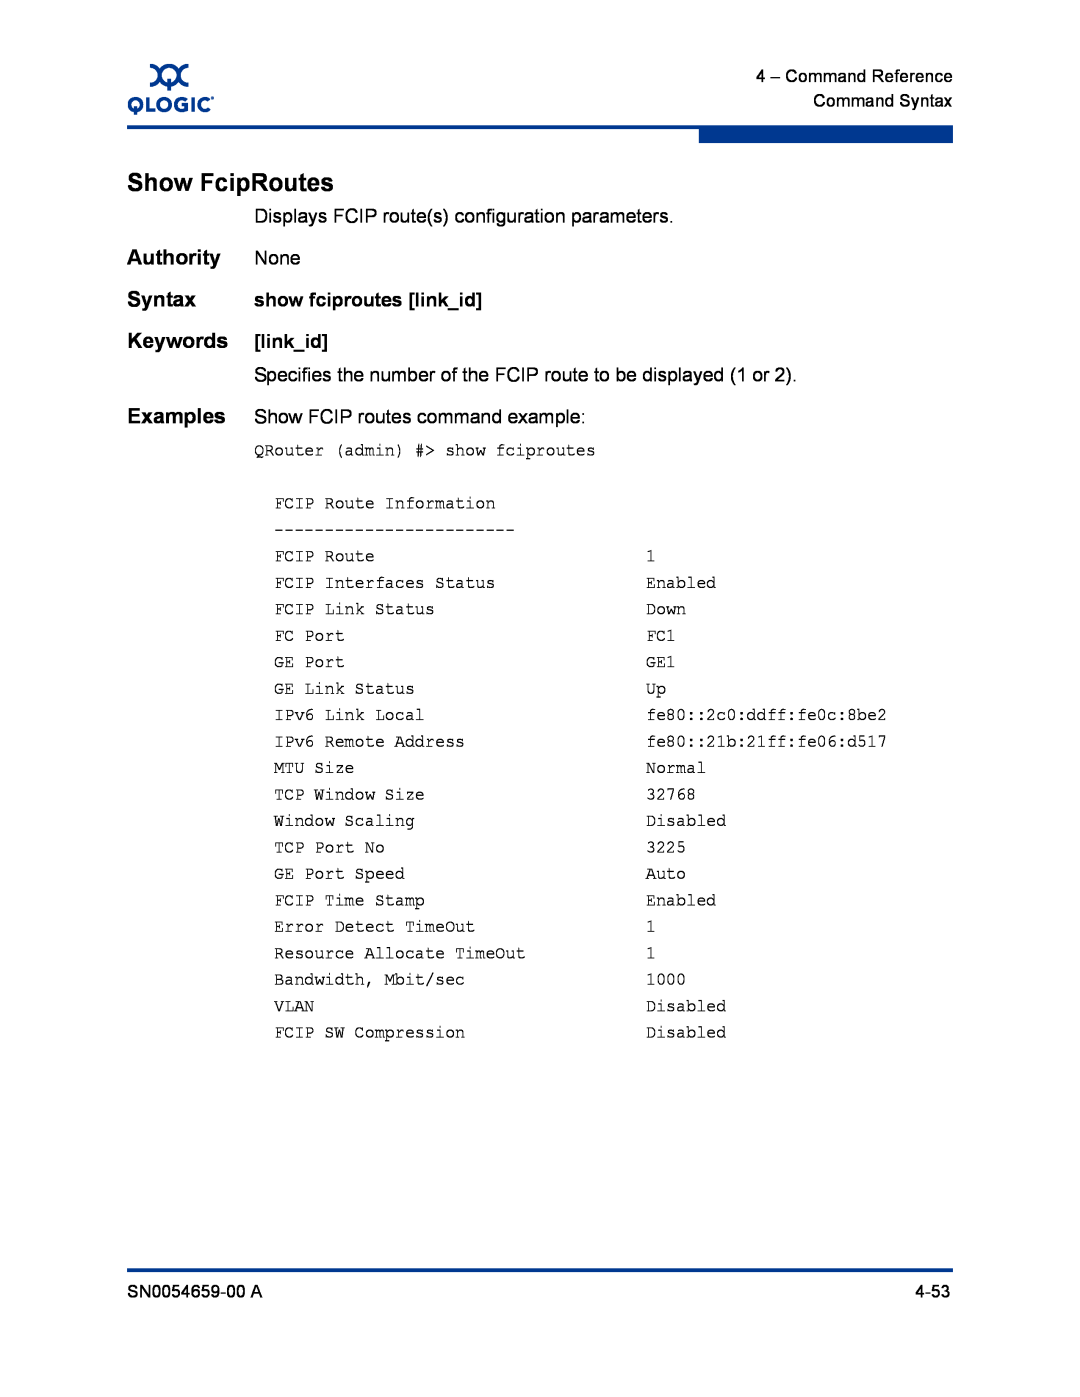 Q-Logic ISR6142 manual Show FcipRoutes, Authority, Syntax, Keywords, show fciproutes linkid 